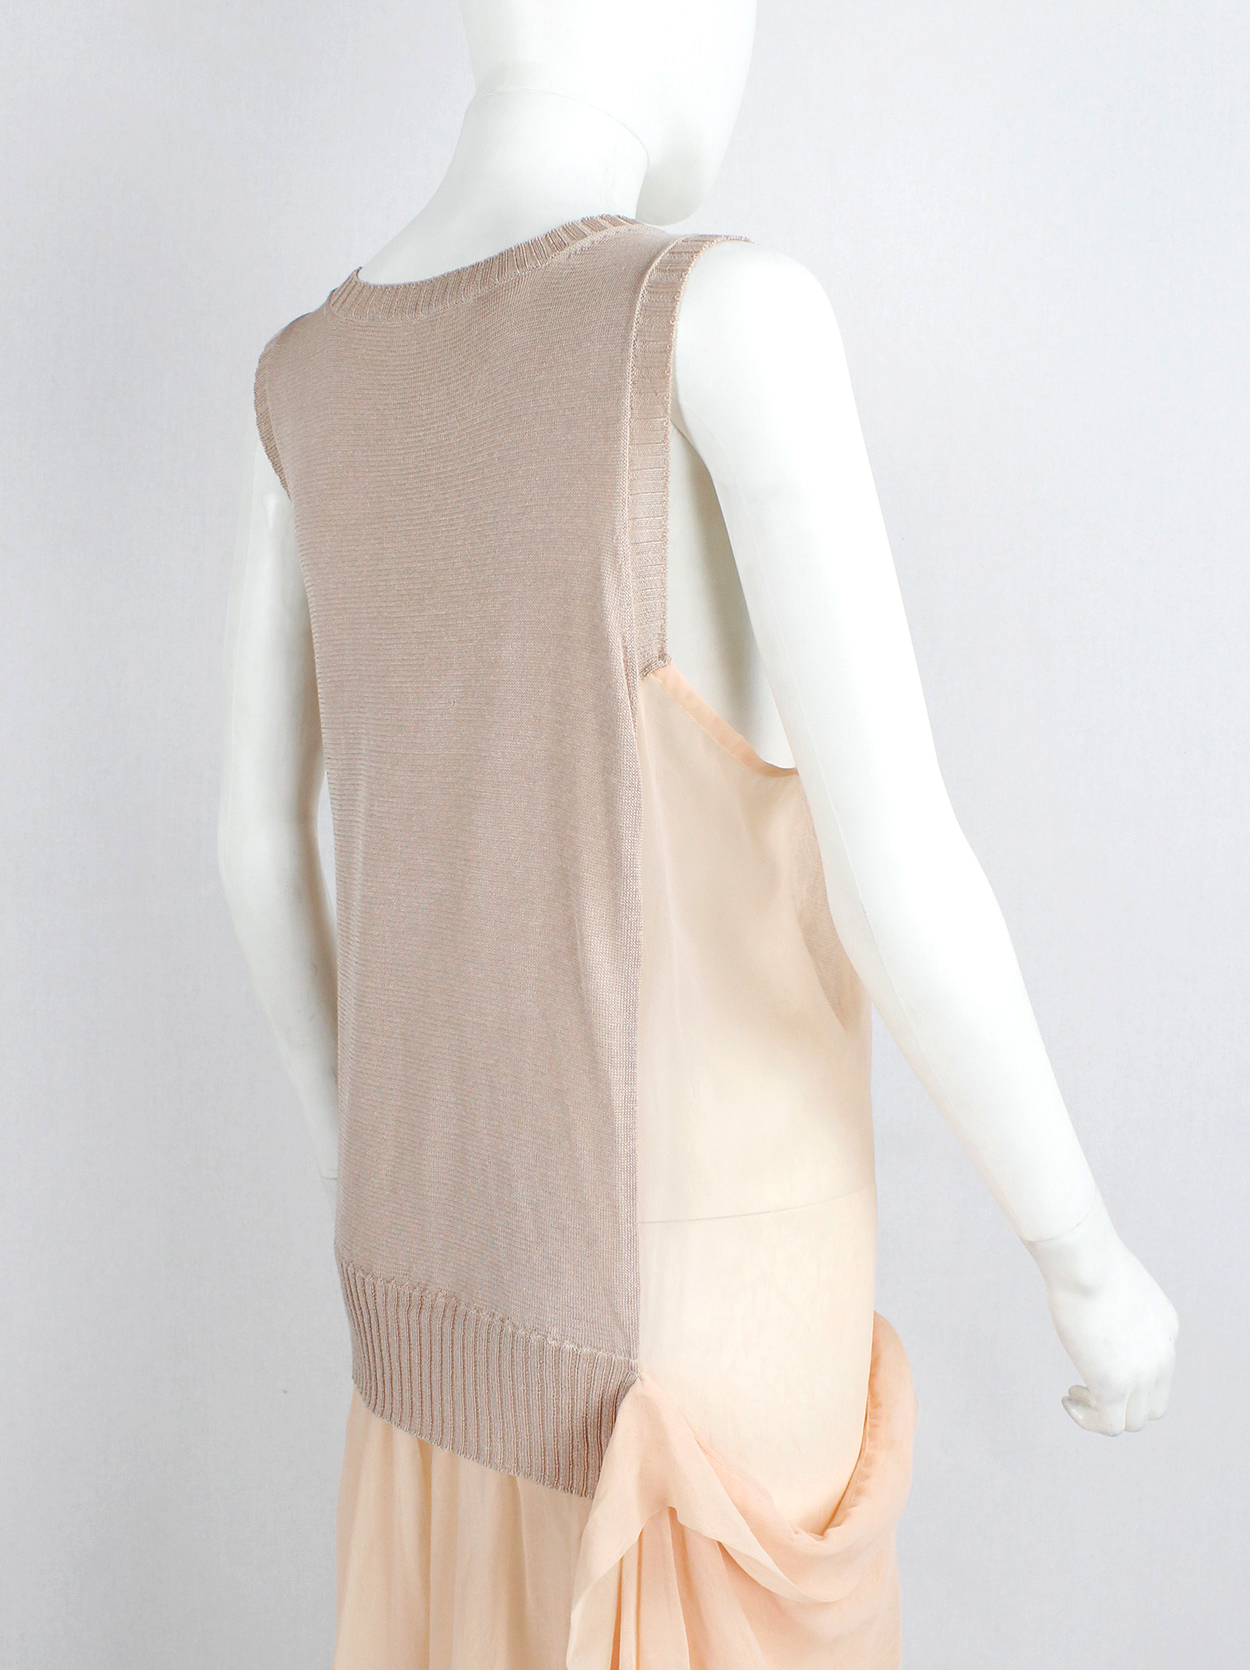 Limi Feu peach sheer dress with draped layers under a deconstructed ...